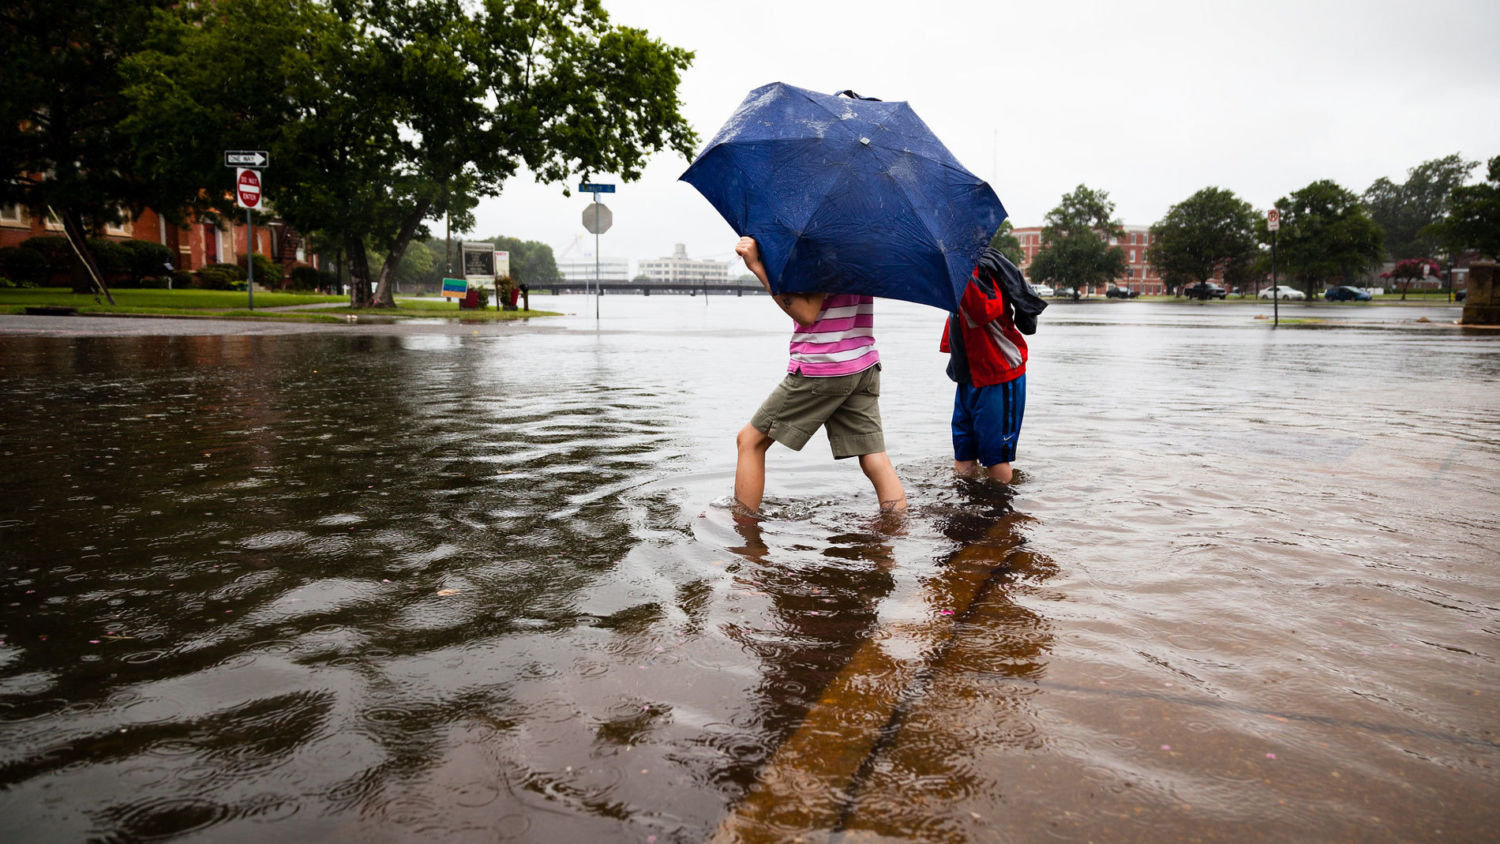 100 Year Floods Could Soon Happen Annually In Parts Of U S Study Finds Yale 60